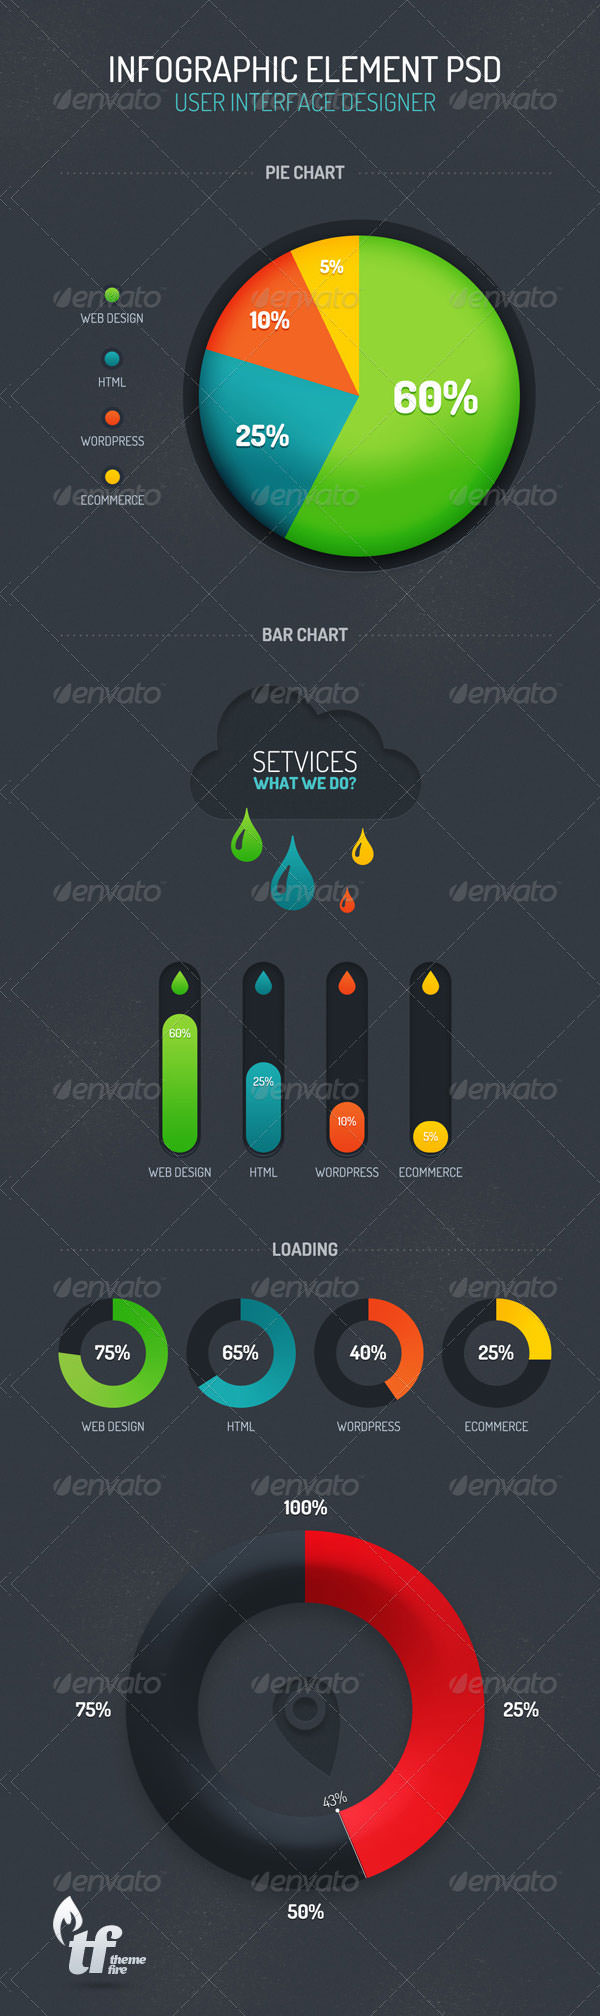 infographic element psd